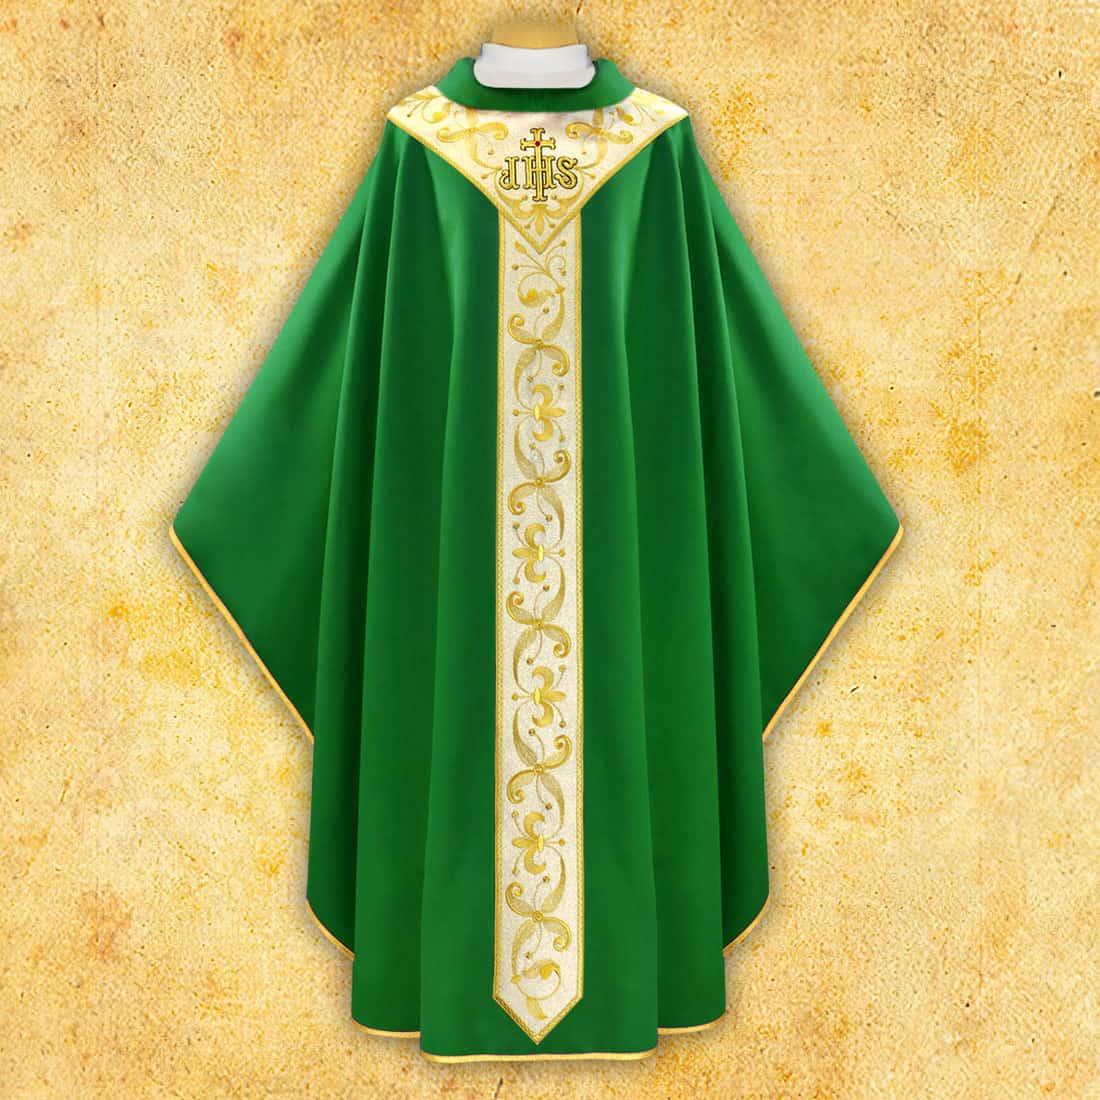 Embroidered chasuble "Religione"